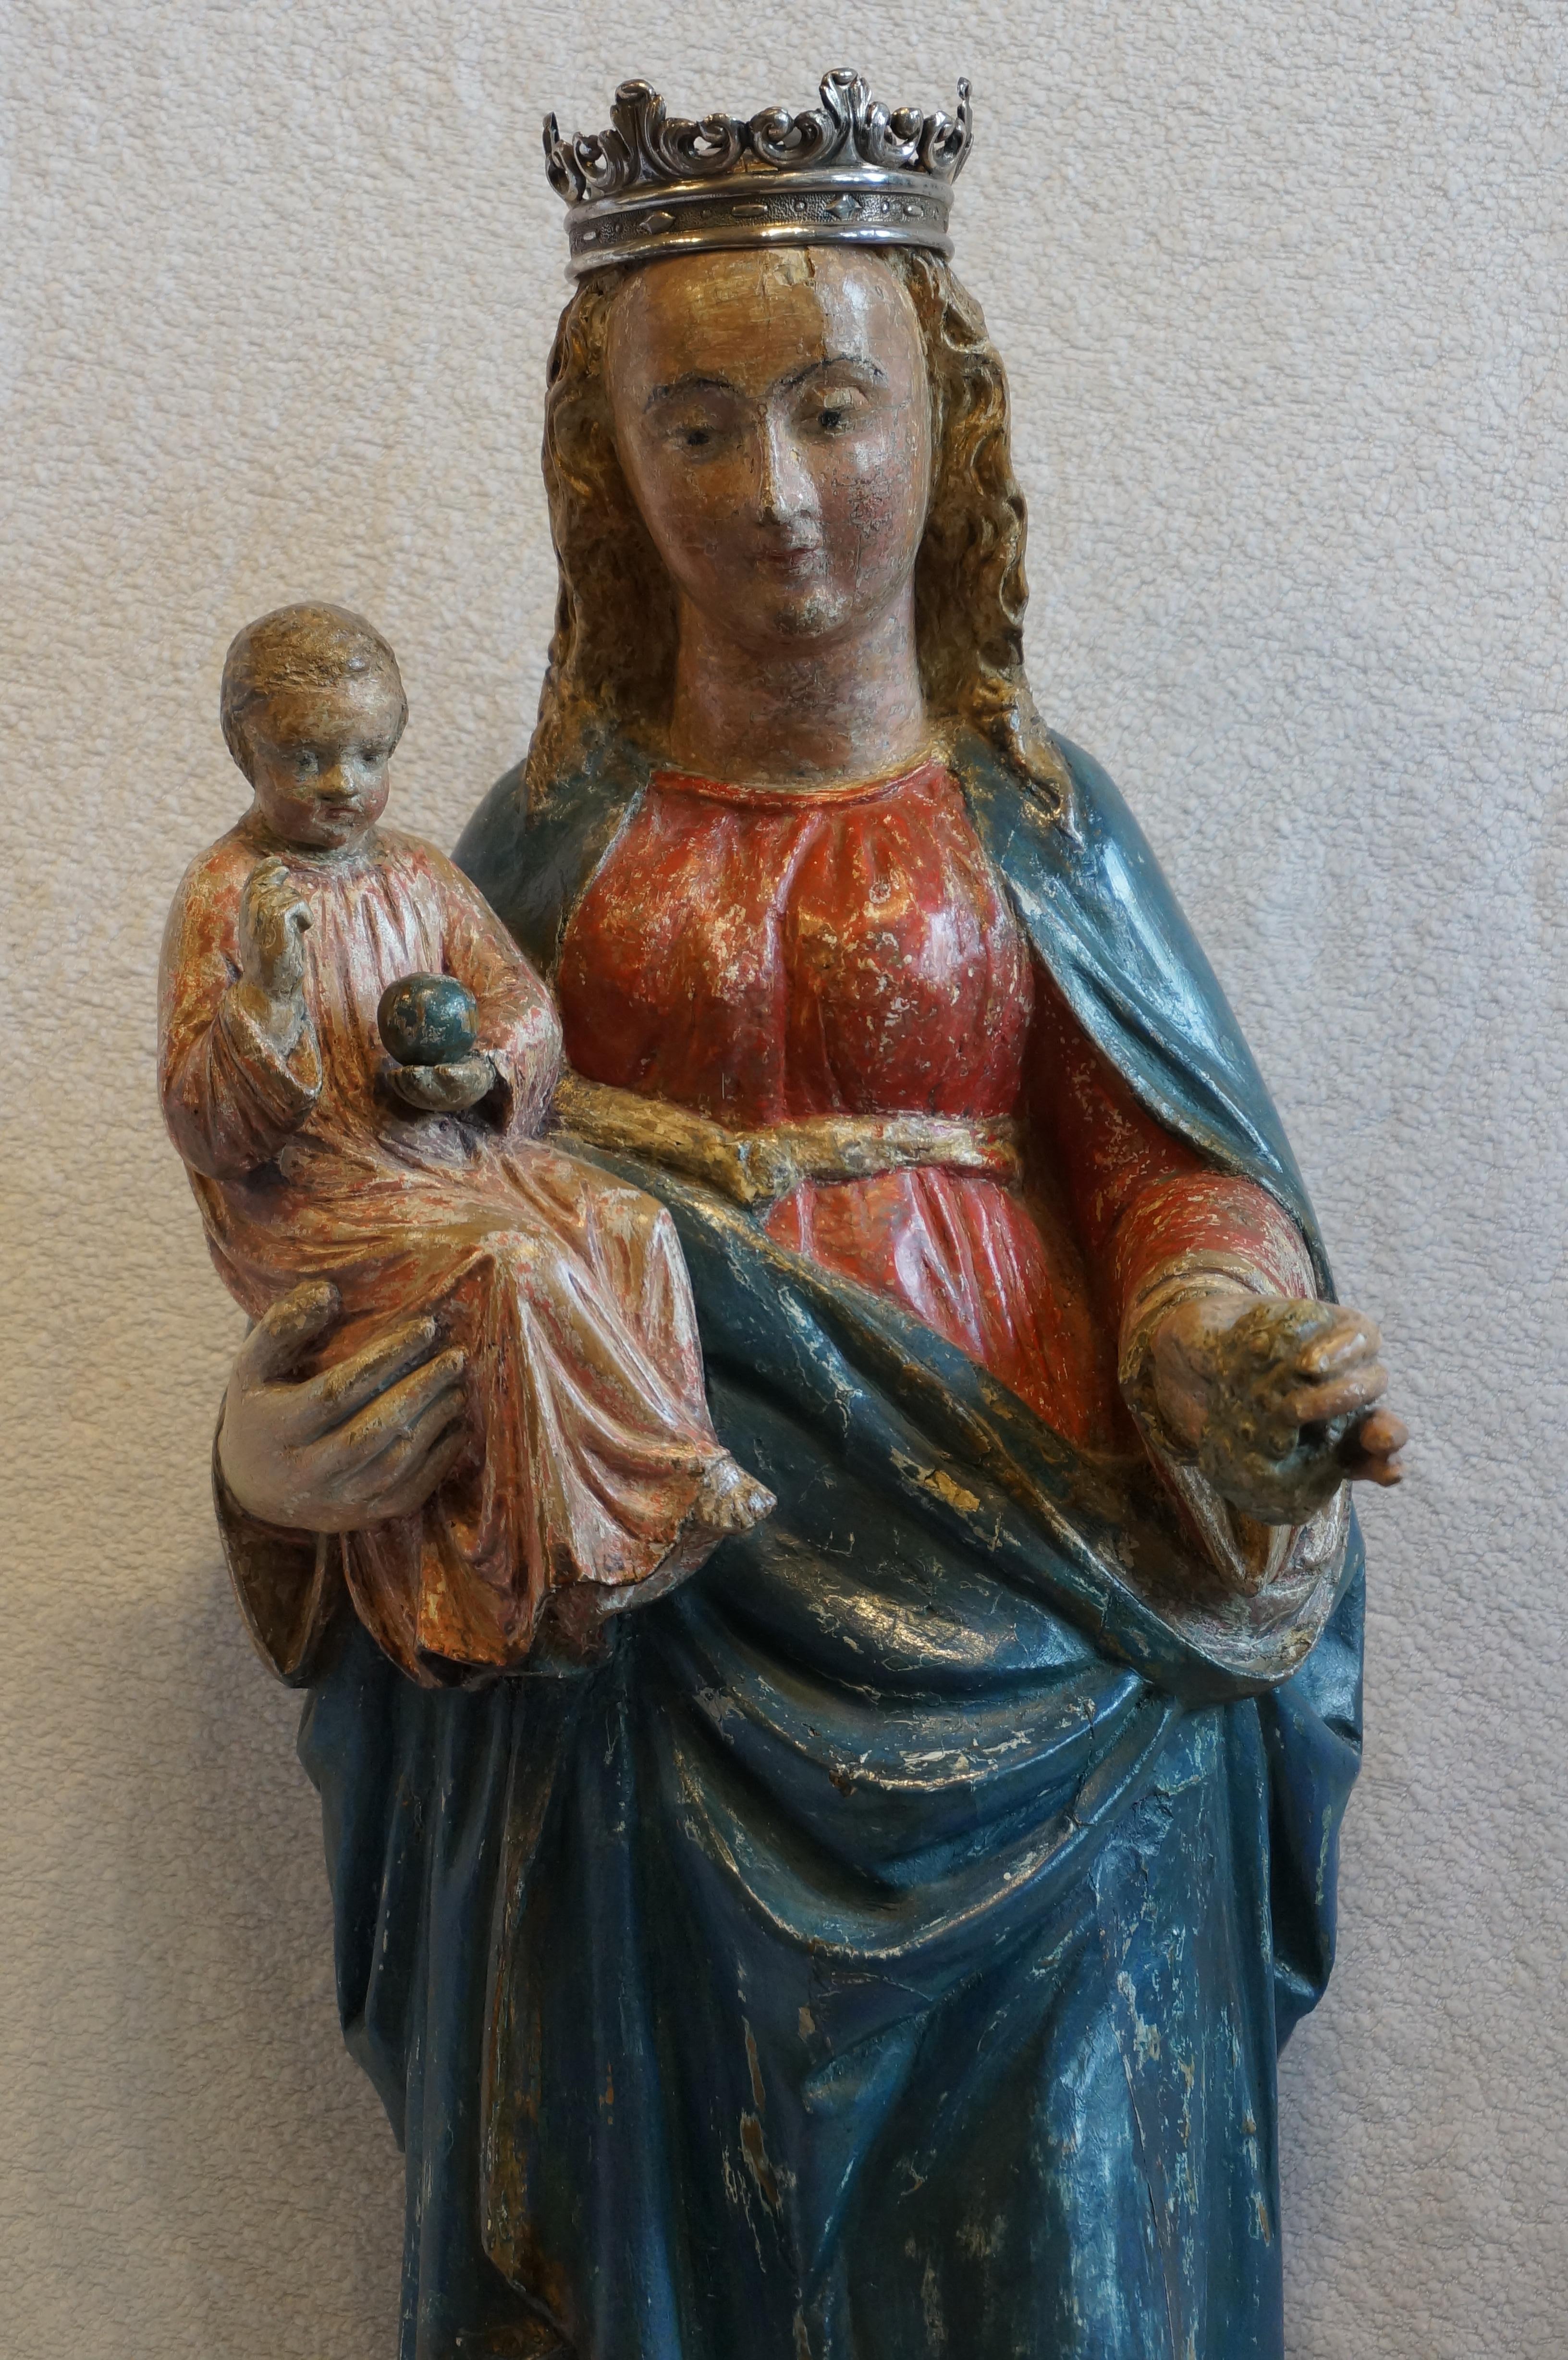 Renaissance Antique Sculpture of Mary with the Child Jesus, Belgium, early 17th century For Sale